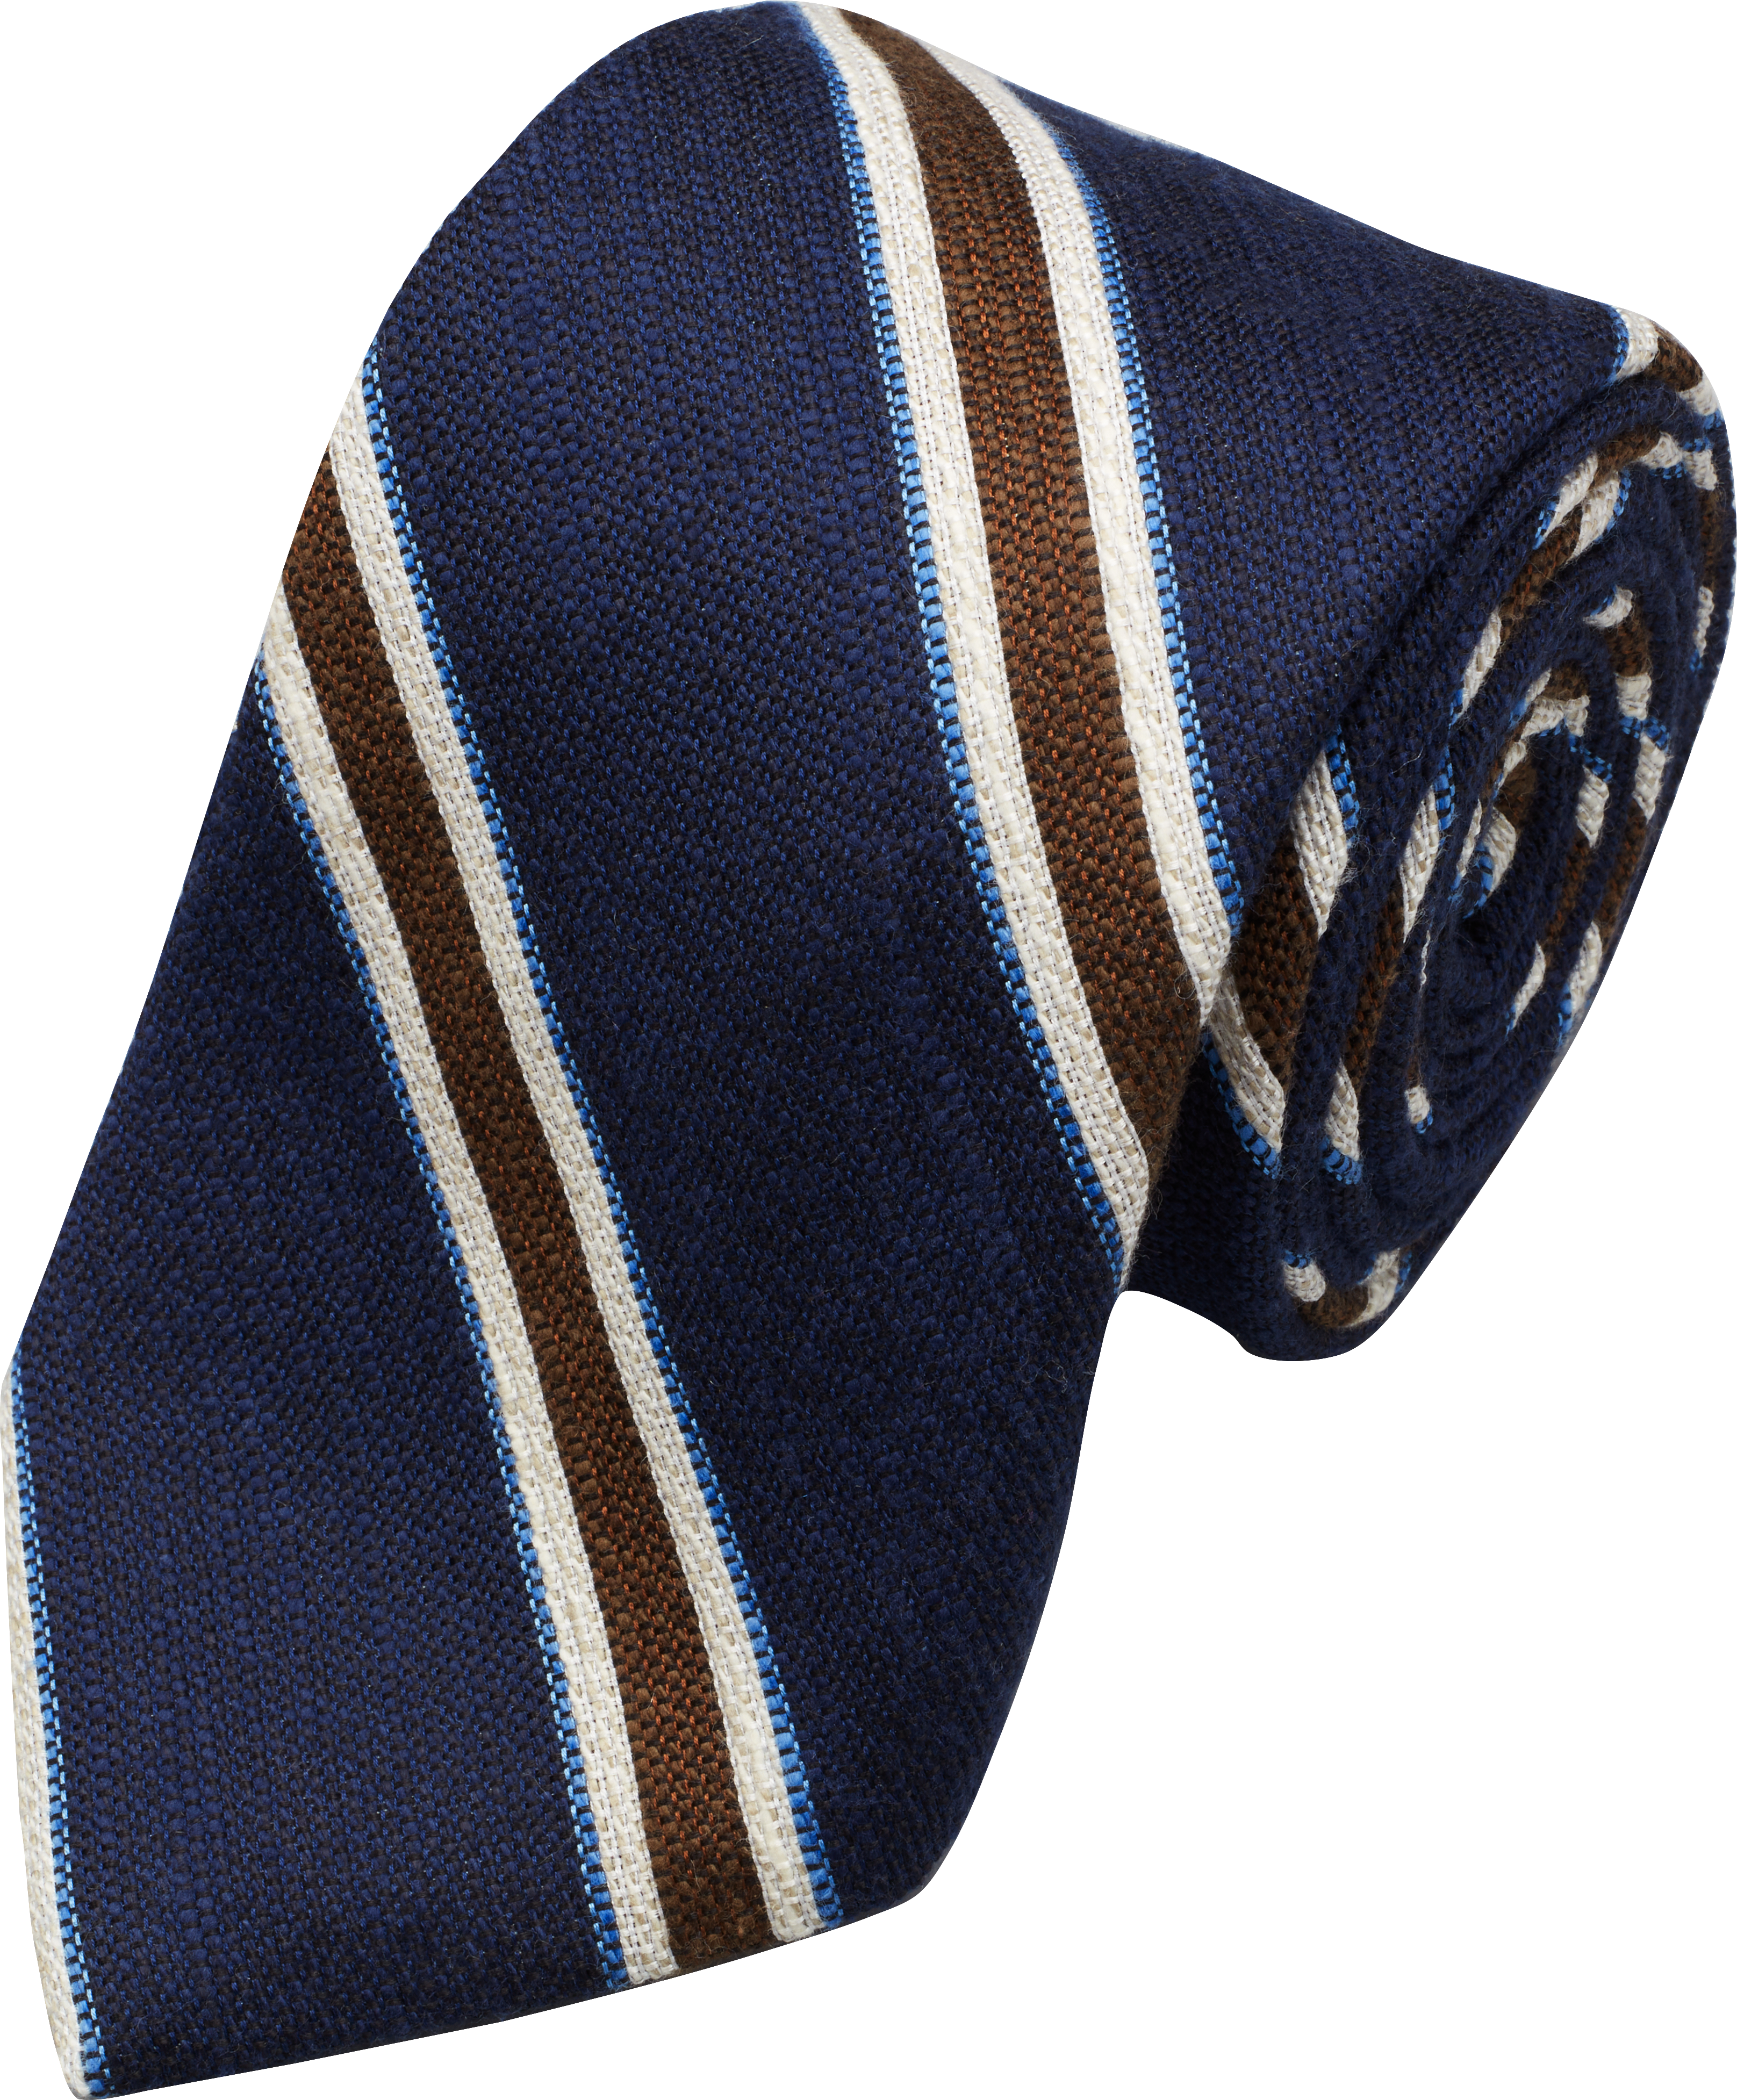 Reserve Collection Stripe Tie - Reserve Ties | Jos A Bank